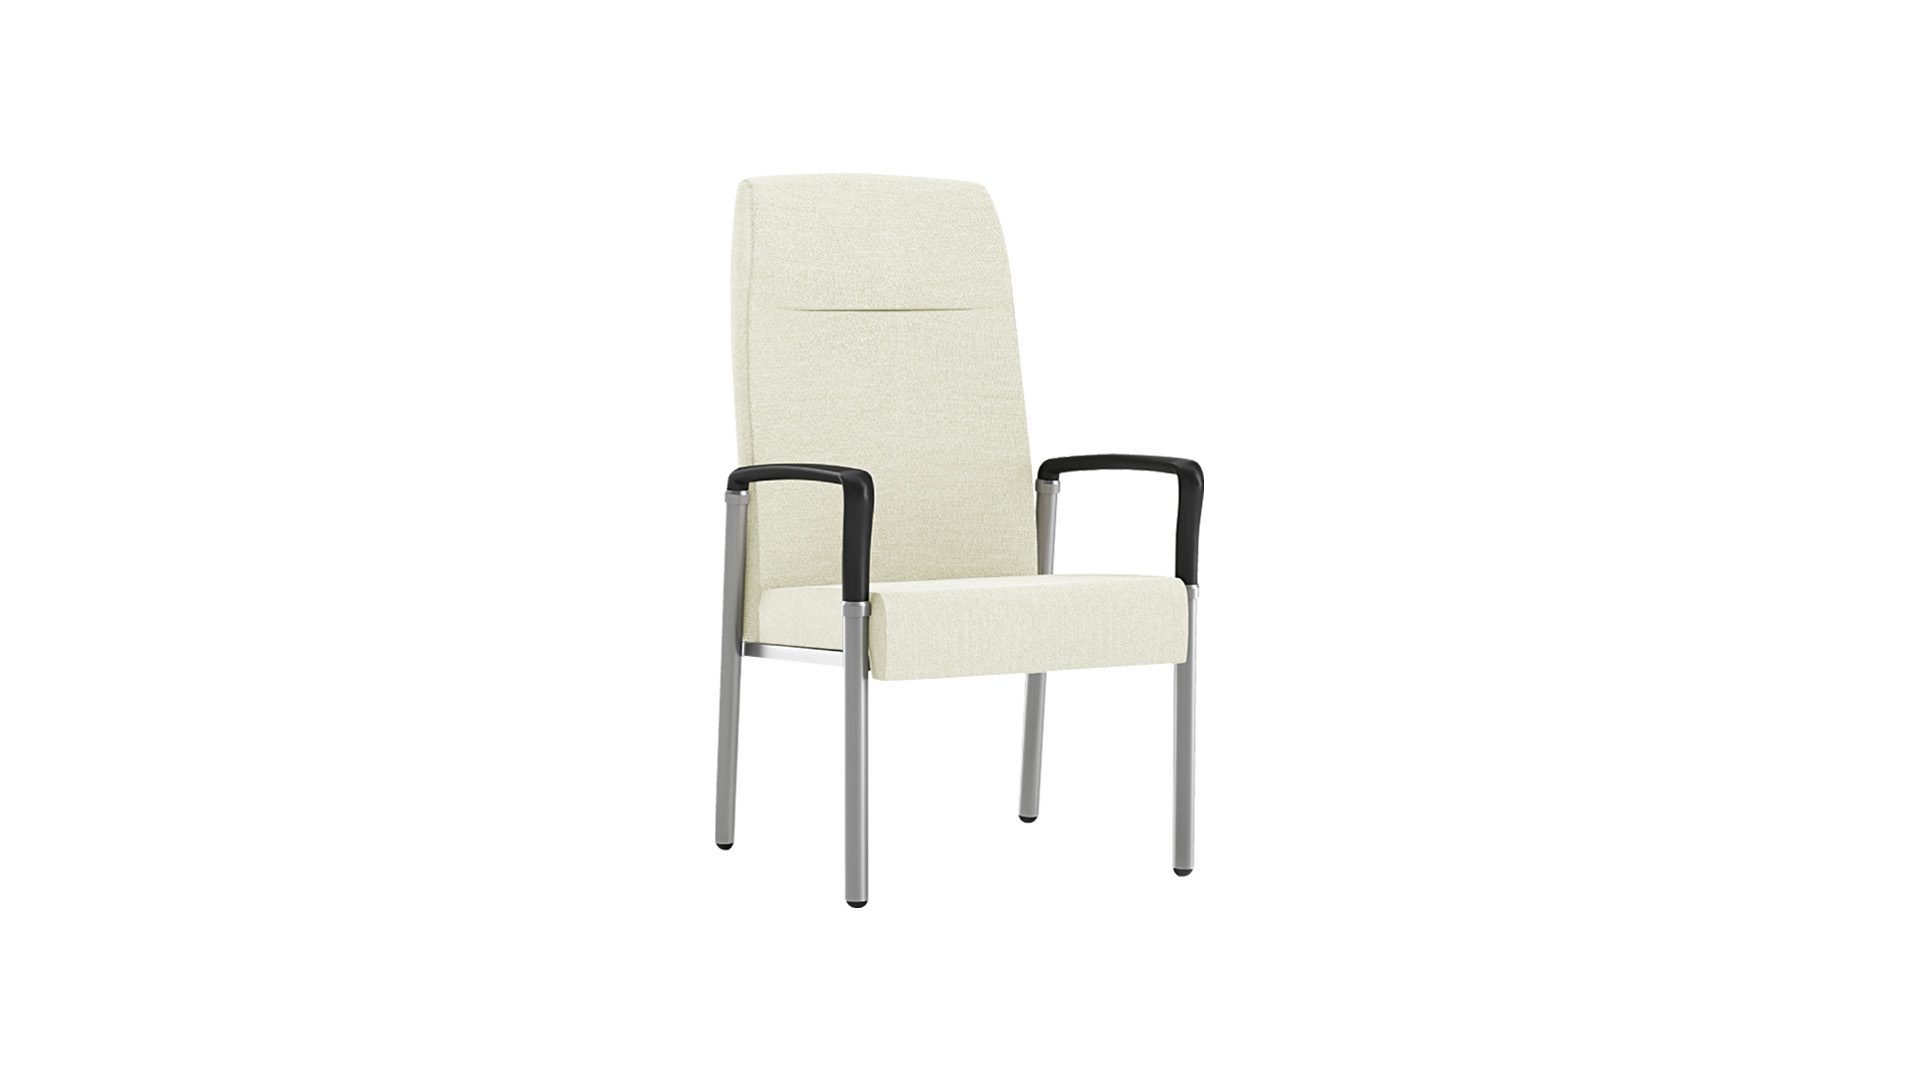 NTP130 Integrity Highback Patient Chair with 21" seat